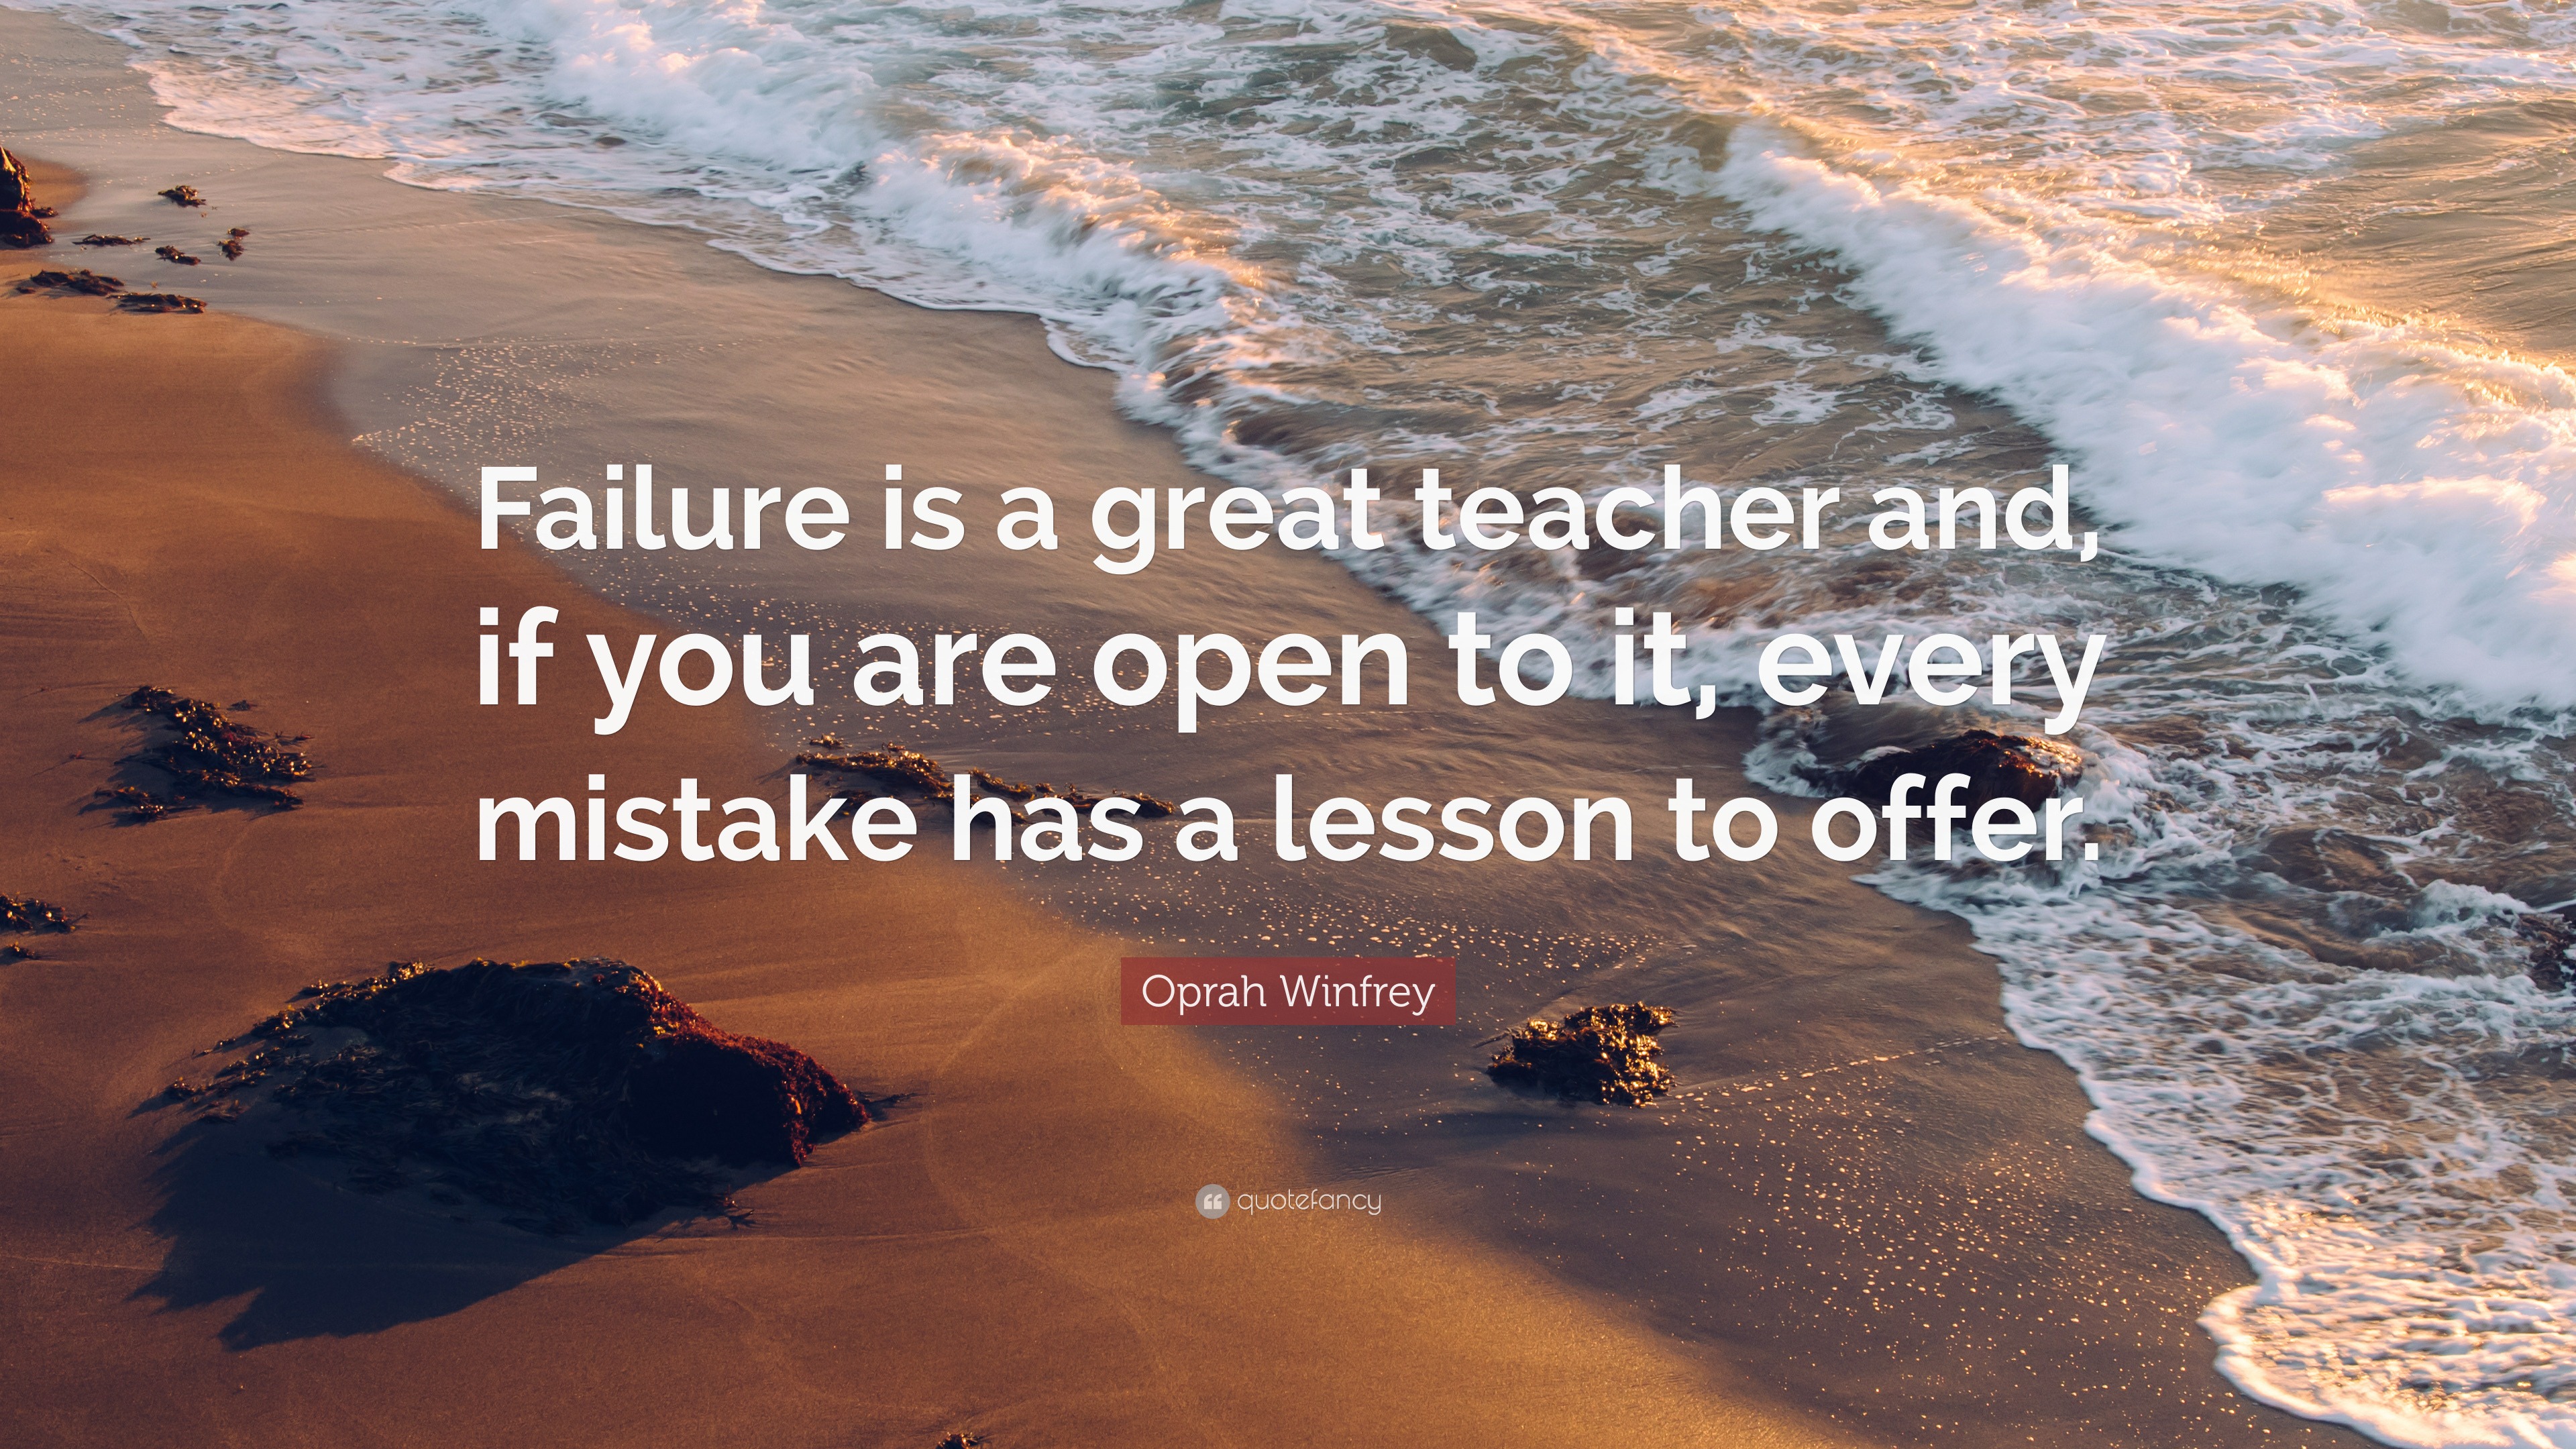 Oprah Winfrey Quote: “Failure is a great teacher and, if you are open